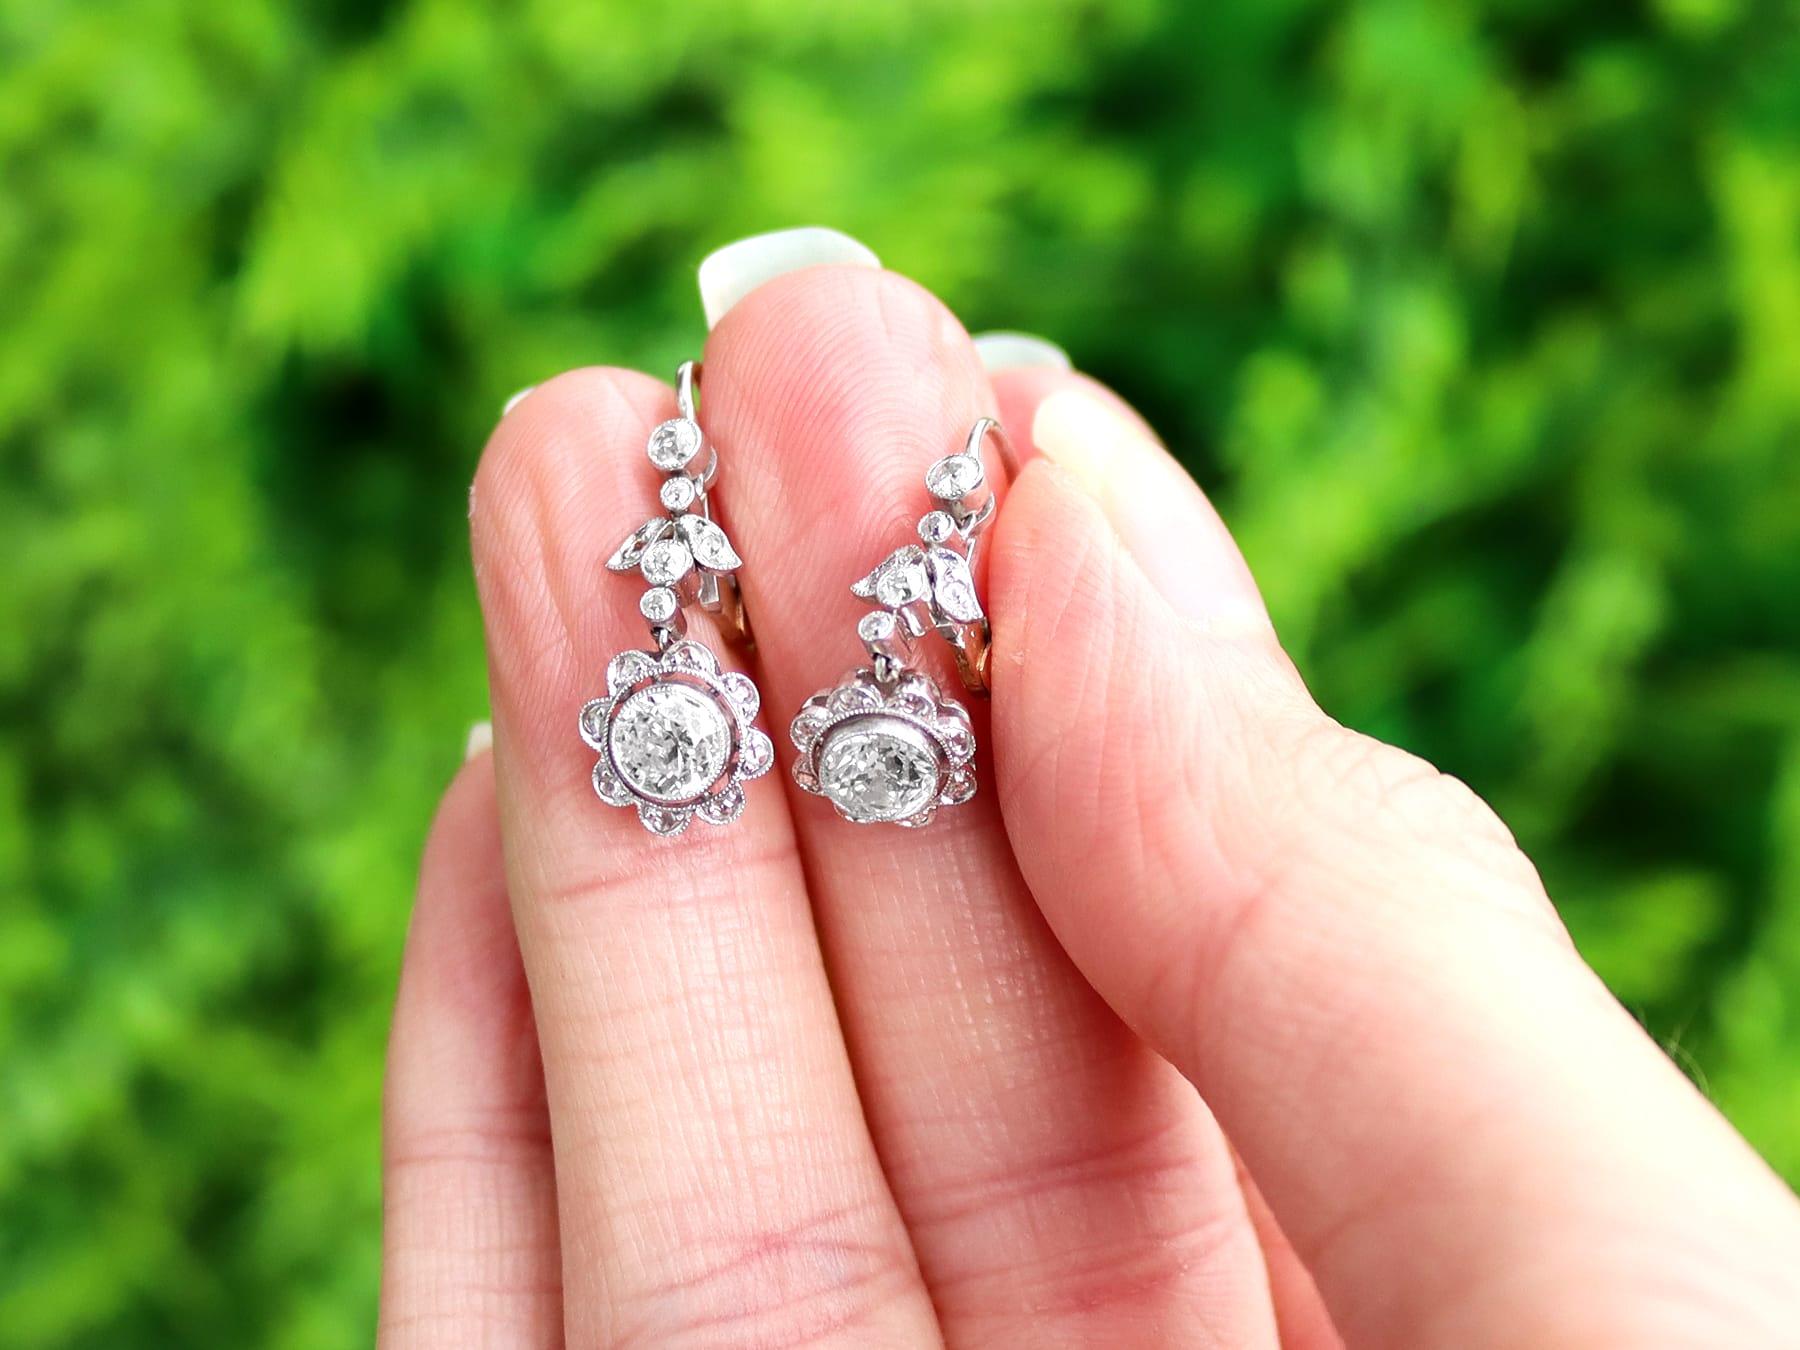 A stunning, fine and impressive pair of antique 1.42 carat diamond, platinum and 15 karat yellow gold drop earrings; part of our diverse antique jewelry collections.

These fine and impressive antique drop earrings have been crafted in